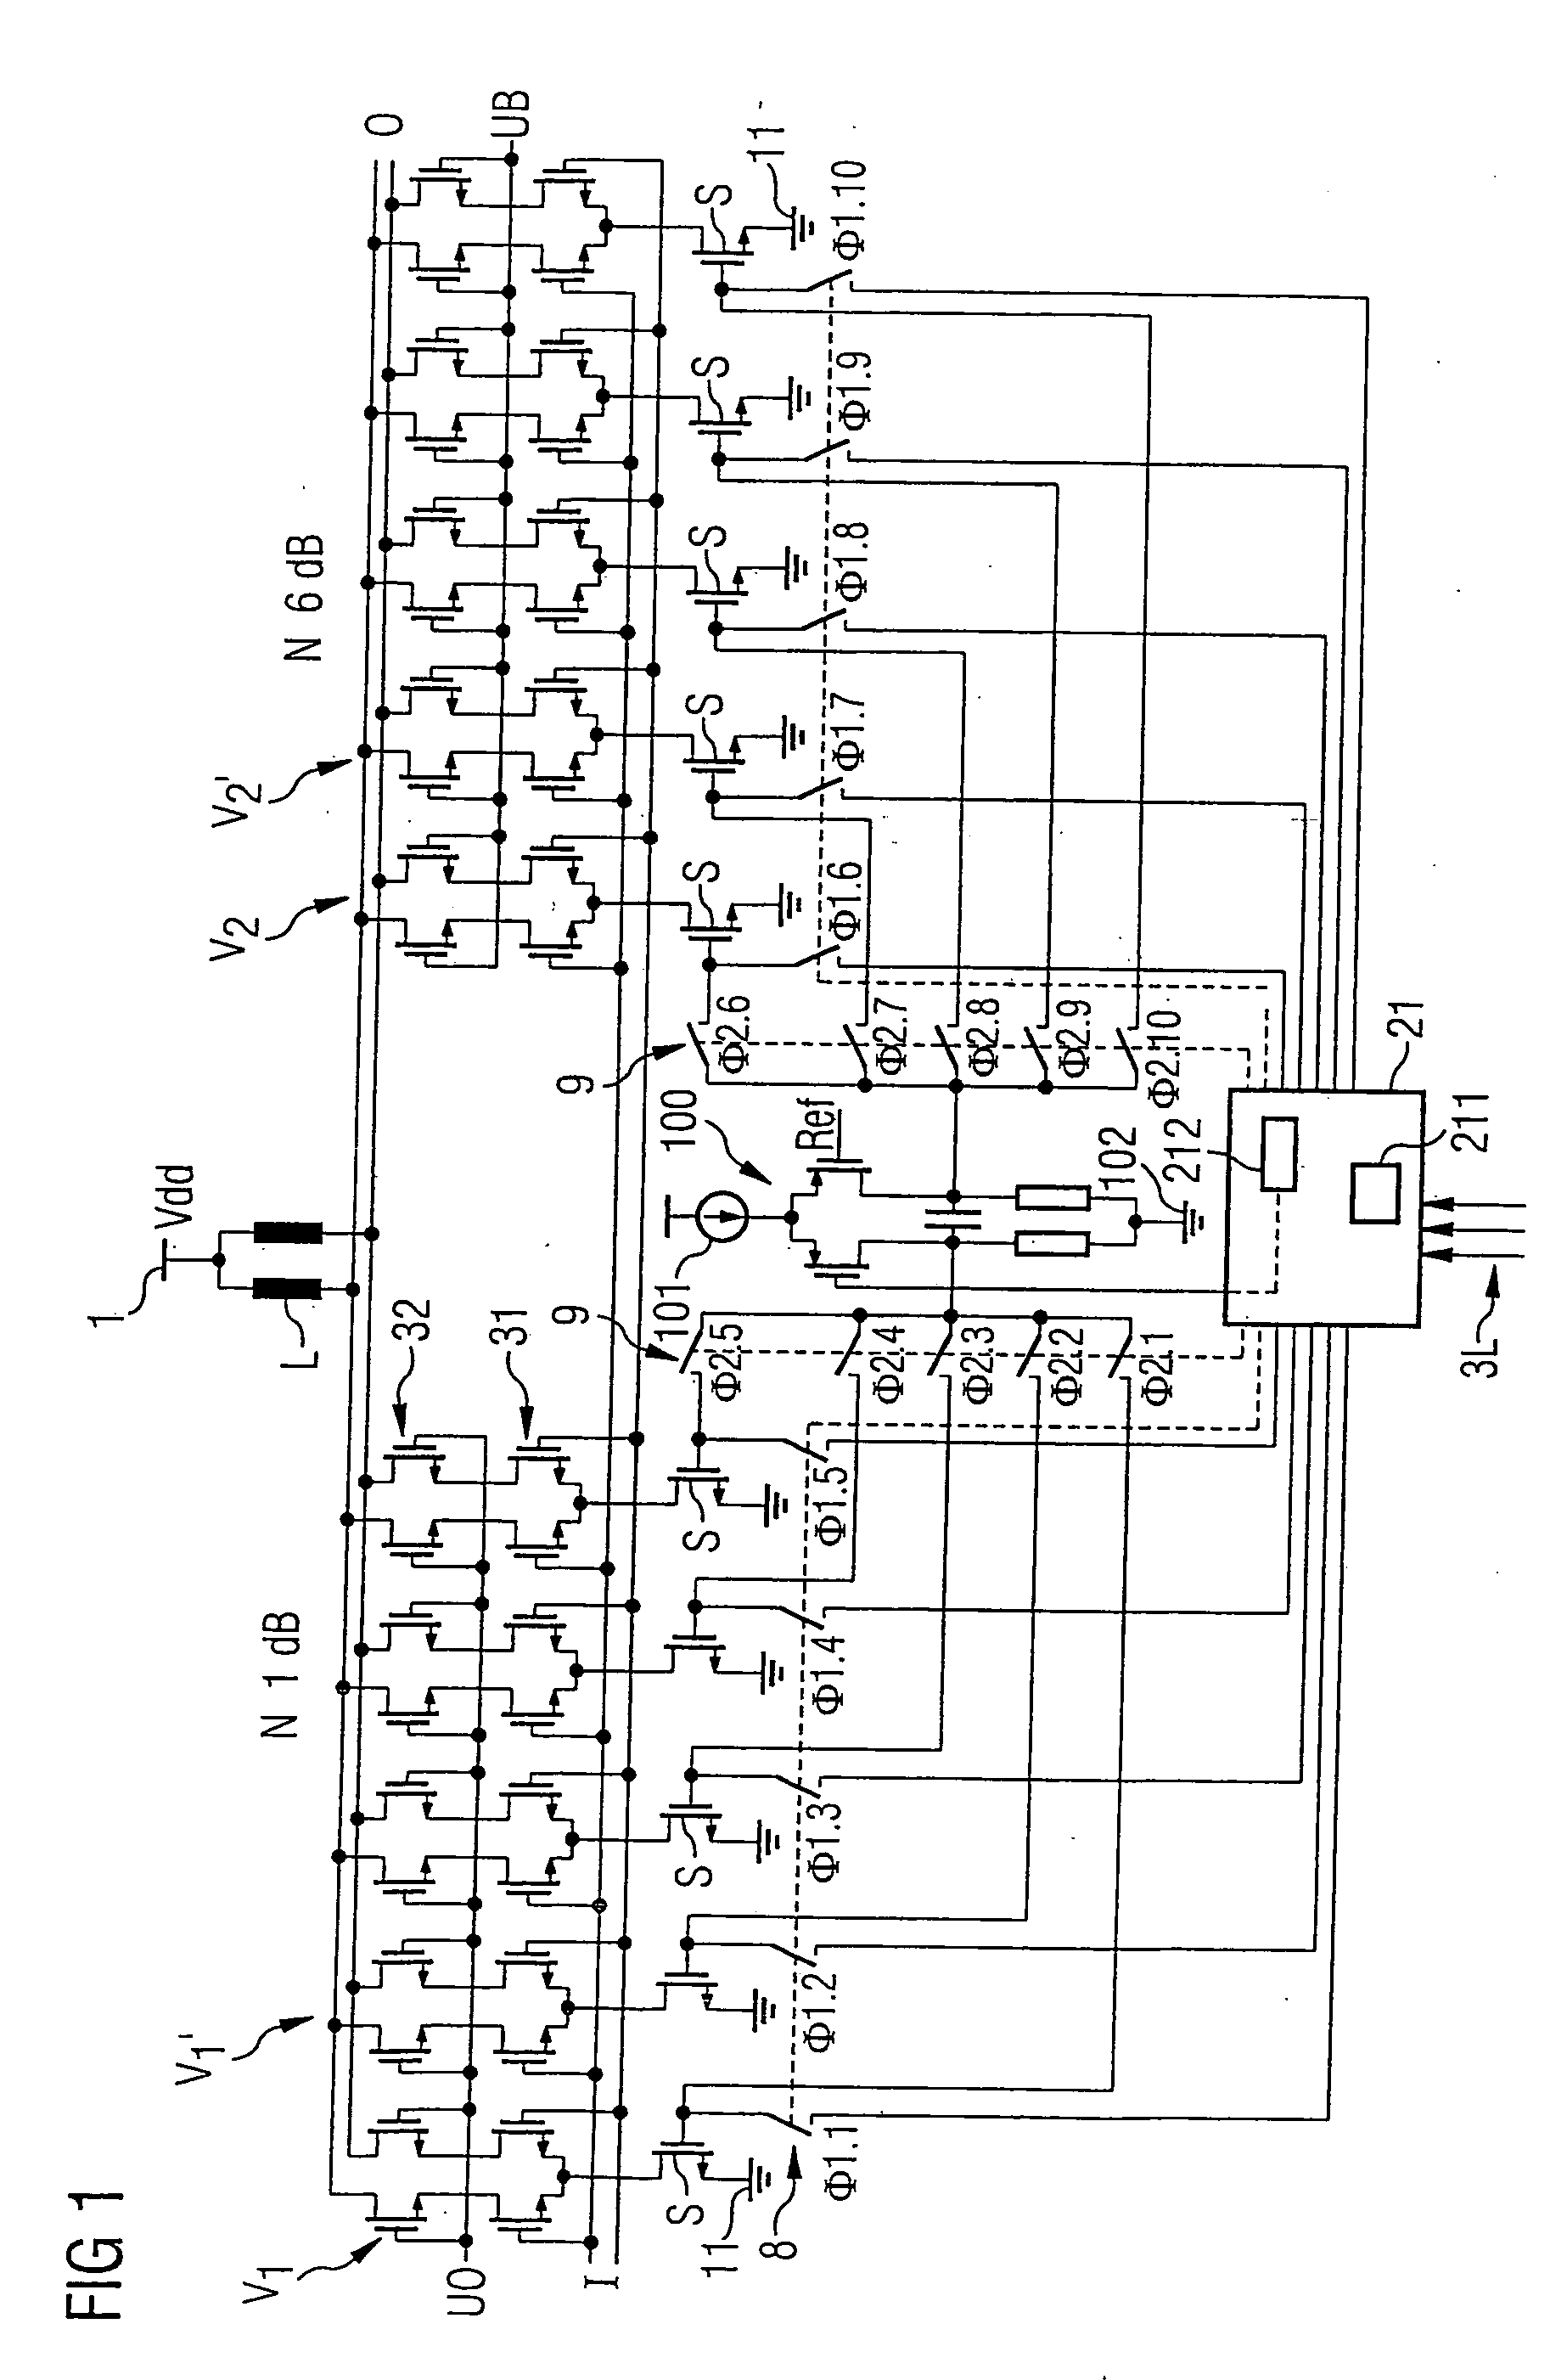 Controllable amplifier circuit with a variable discrete-value gain, use of the amplifier circuit and method for operation of an amplifier whose gain can be adjusted in discrete values